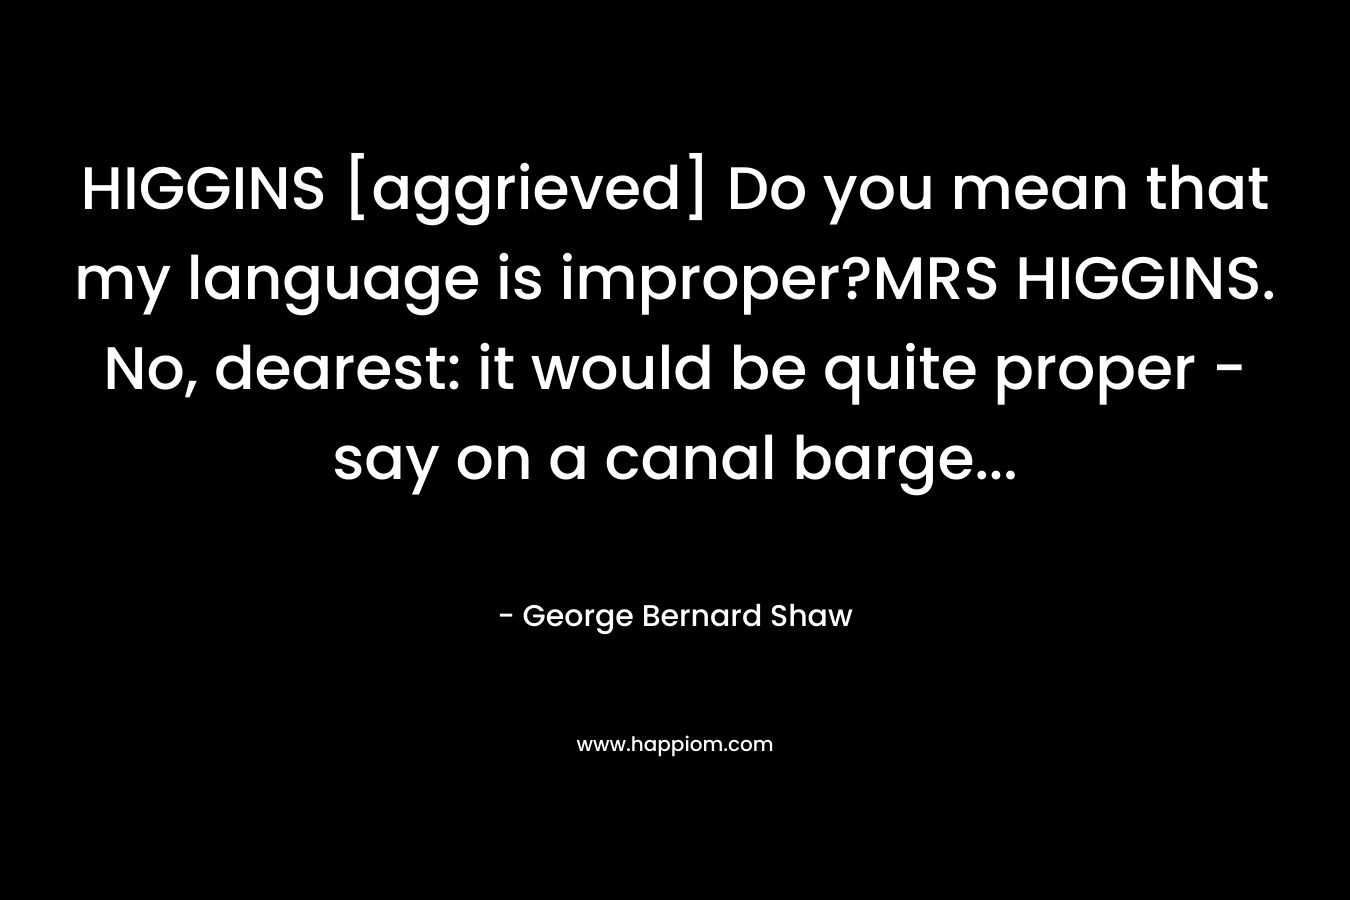 HIGGINS [aggrieved] Do you mean that my language is improper?MRS HIGGINS. No, dearest: it would be quite proper - say on a canal barge...